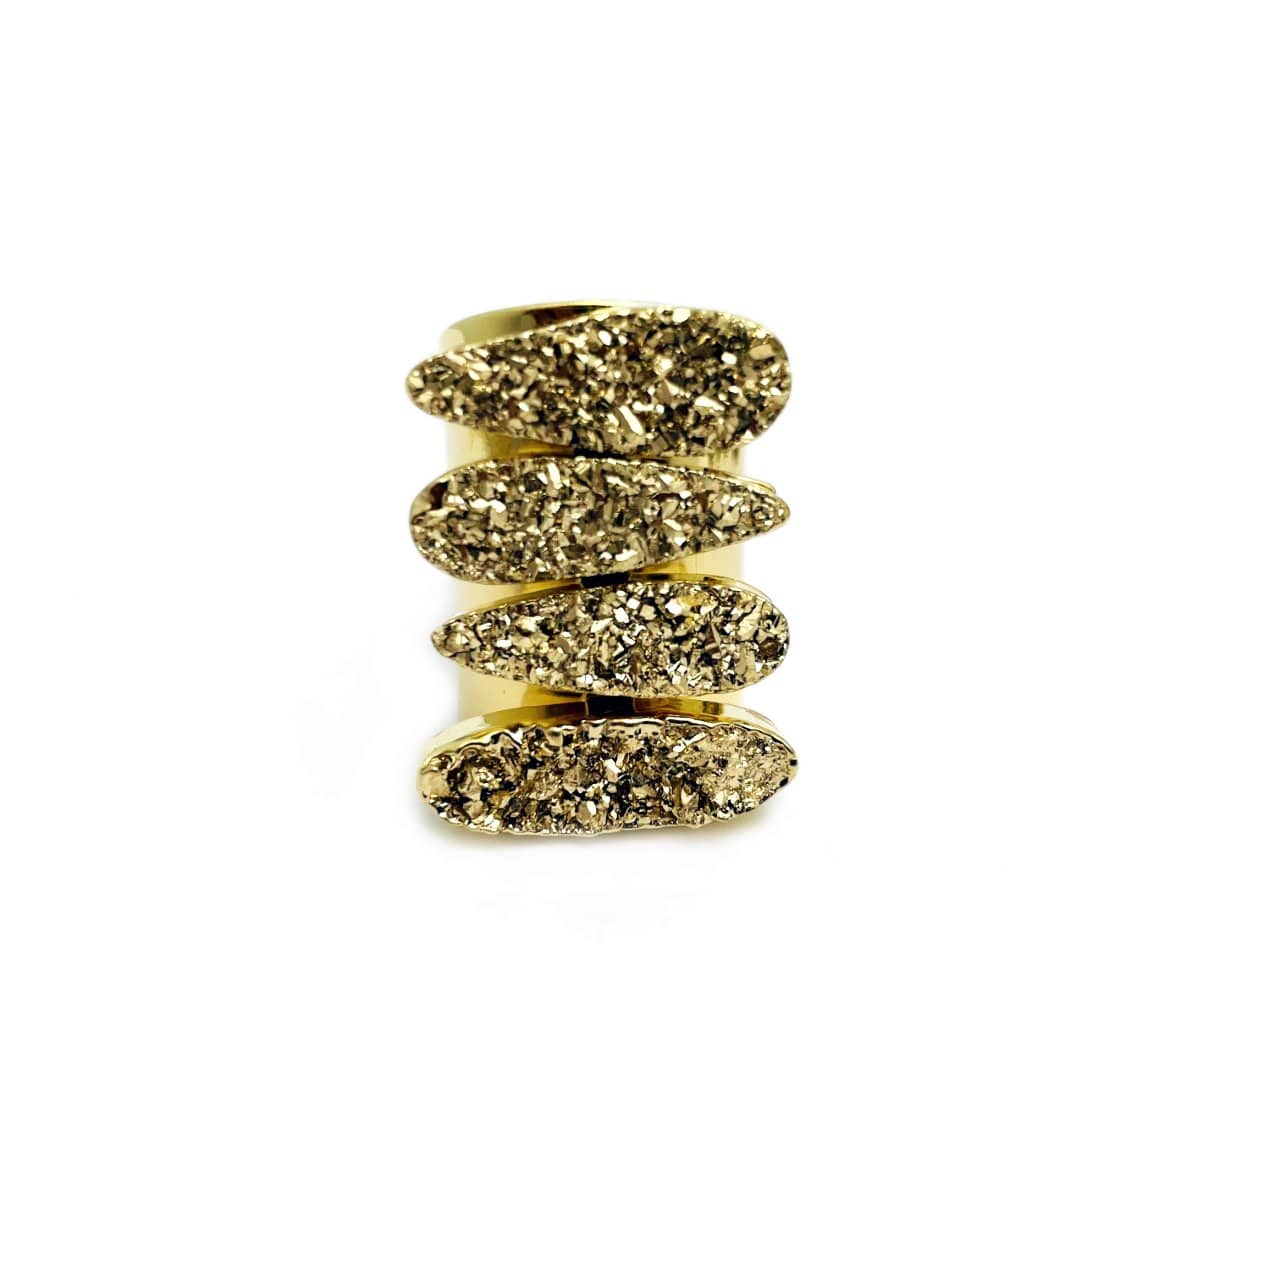 View of the Gold Titanium Adjustable Teardrop Druzy Ring with Electroplated 24k Gold Adjustable Cigar Band